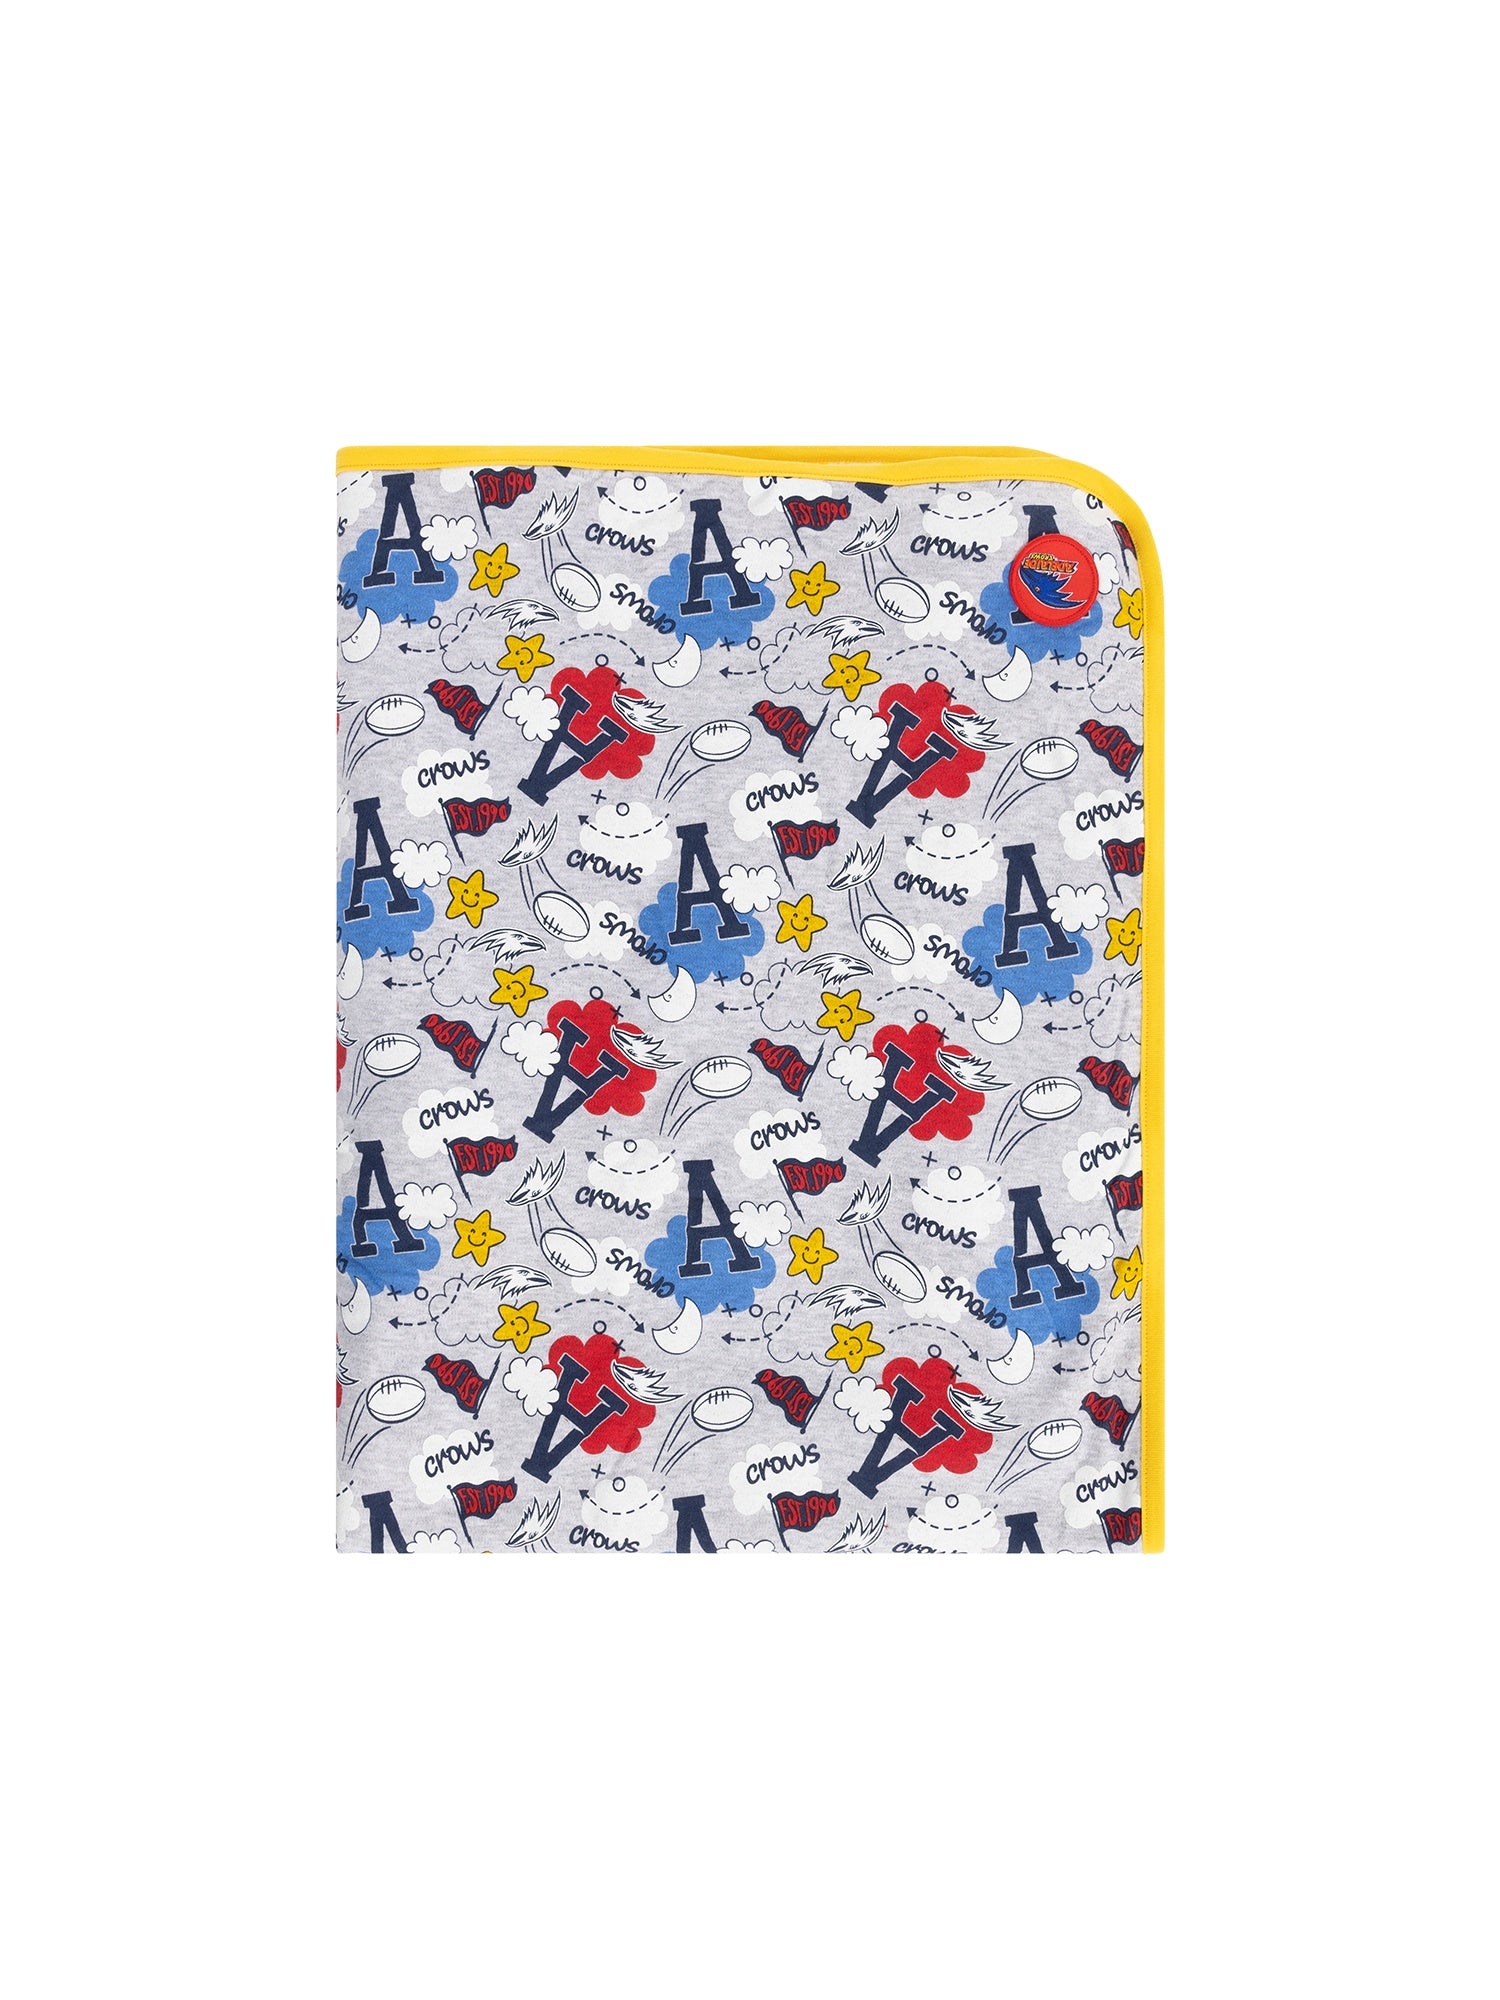 Adelaide Crows Baby Blanket -